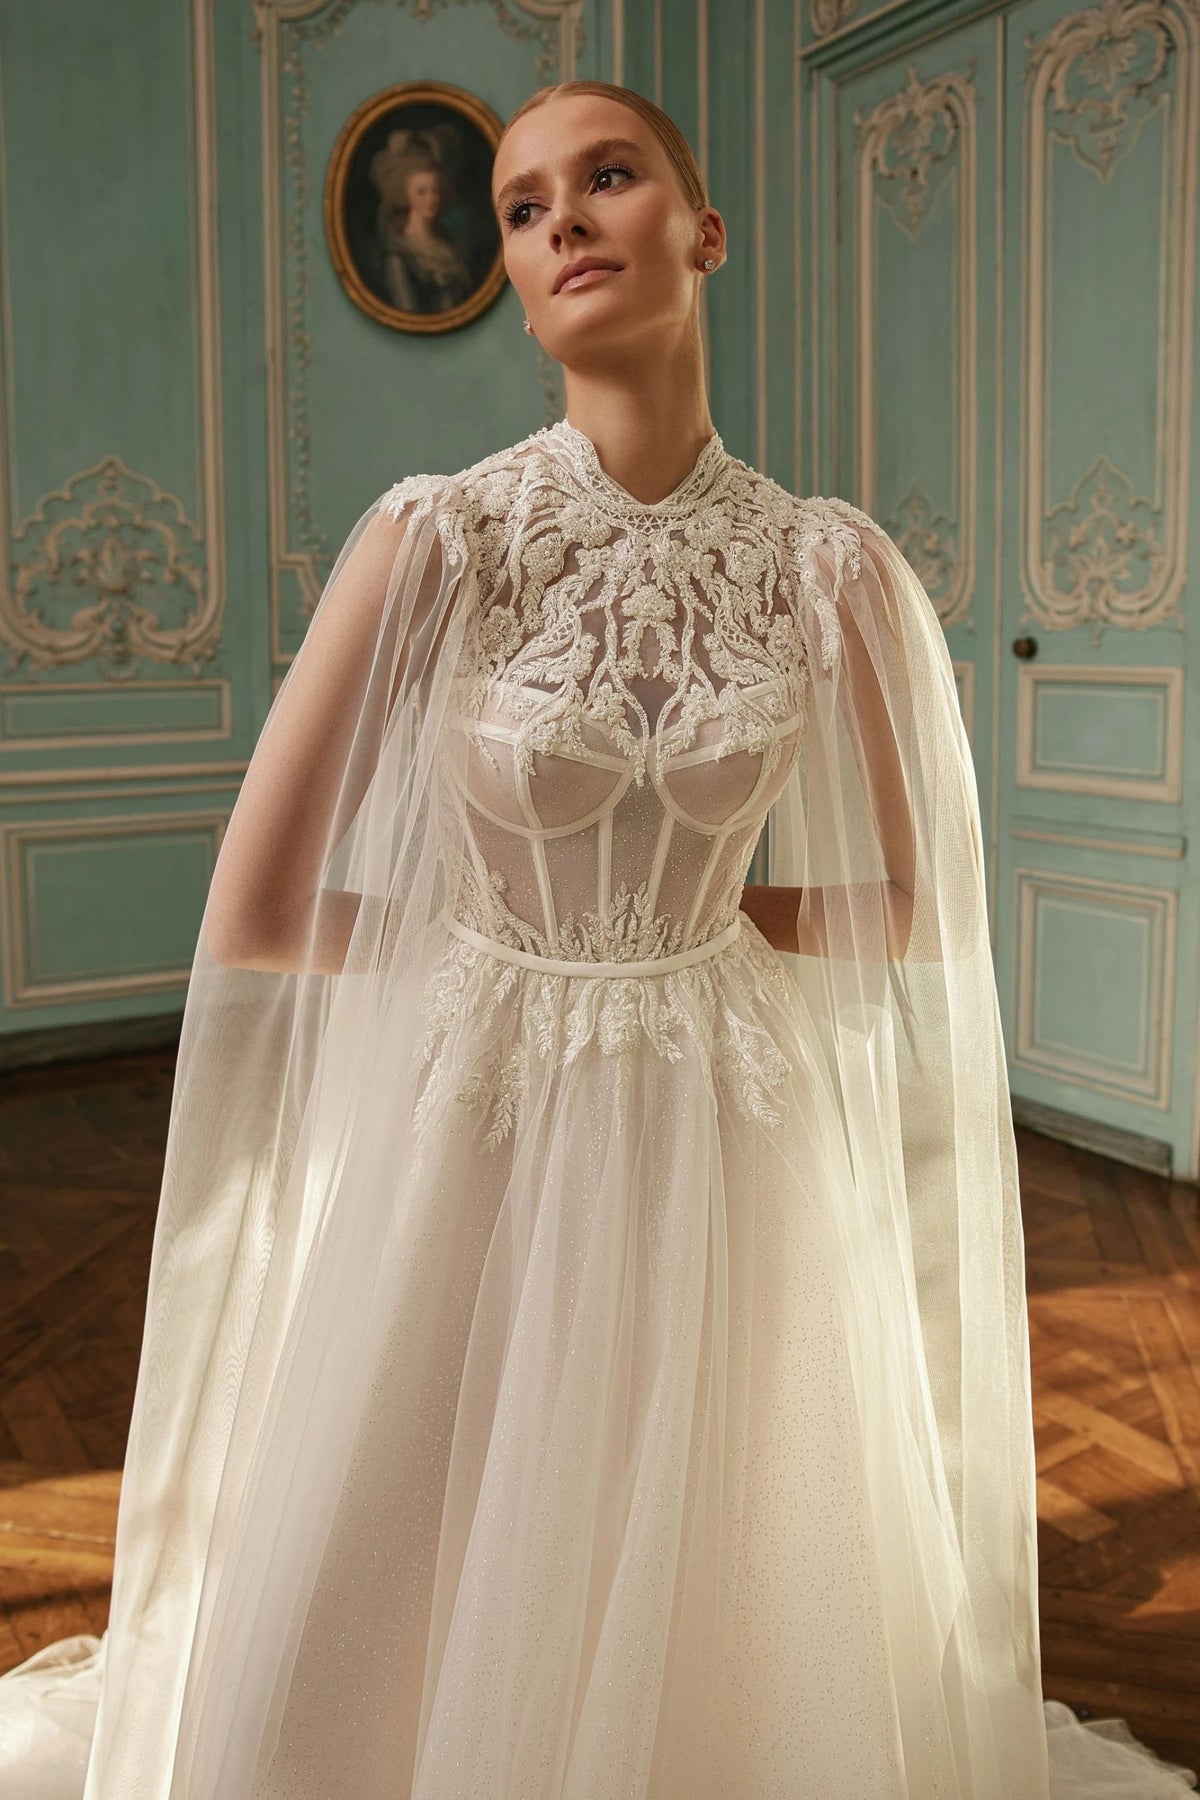 Unique Modern Aline Wedding Dress Bridal Gown with Corset Bodice Bustier Design High Neckline Covered Back Sparkle Dress Cape Sleeves Lace